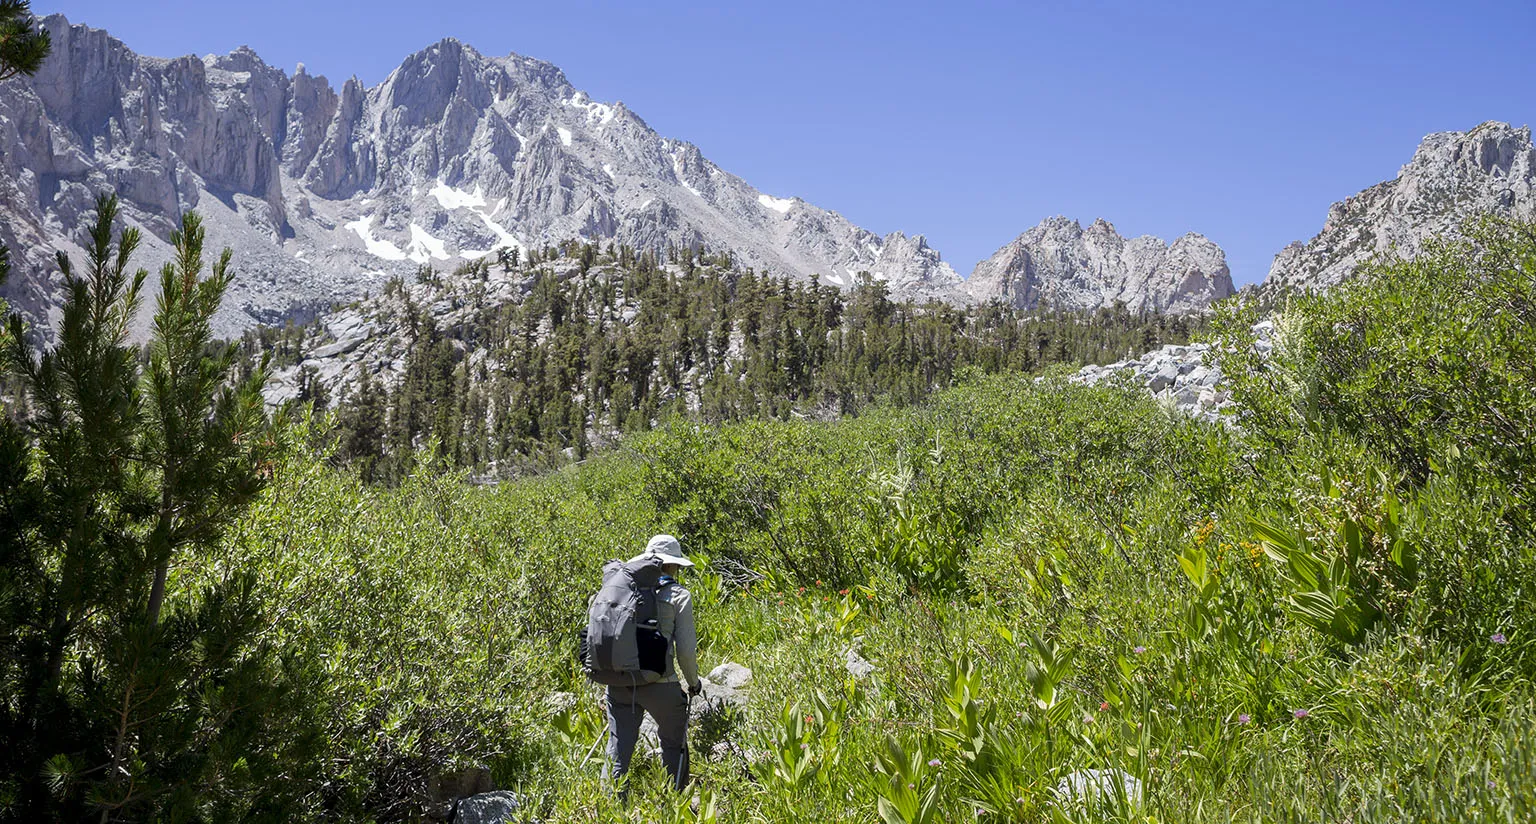 On the Kearsarge Pass Trail with University Peak in the back